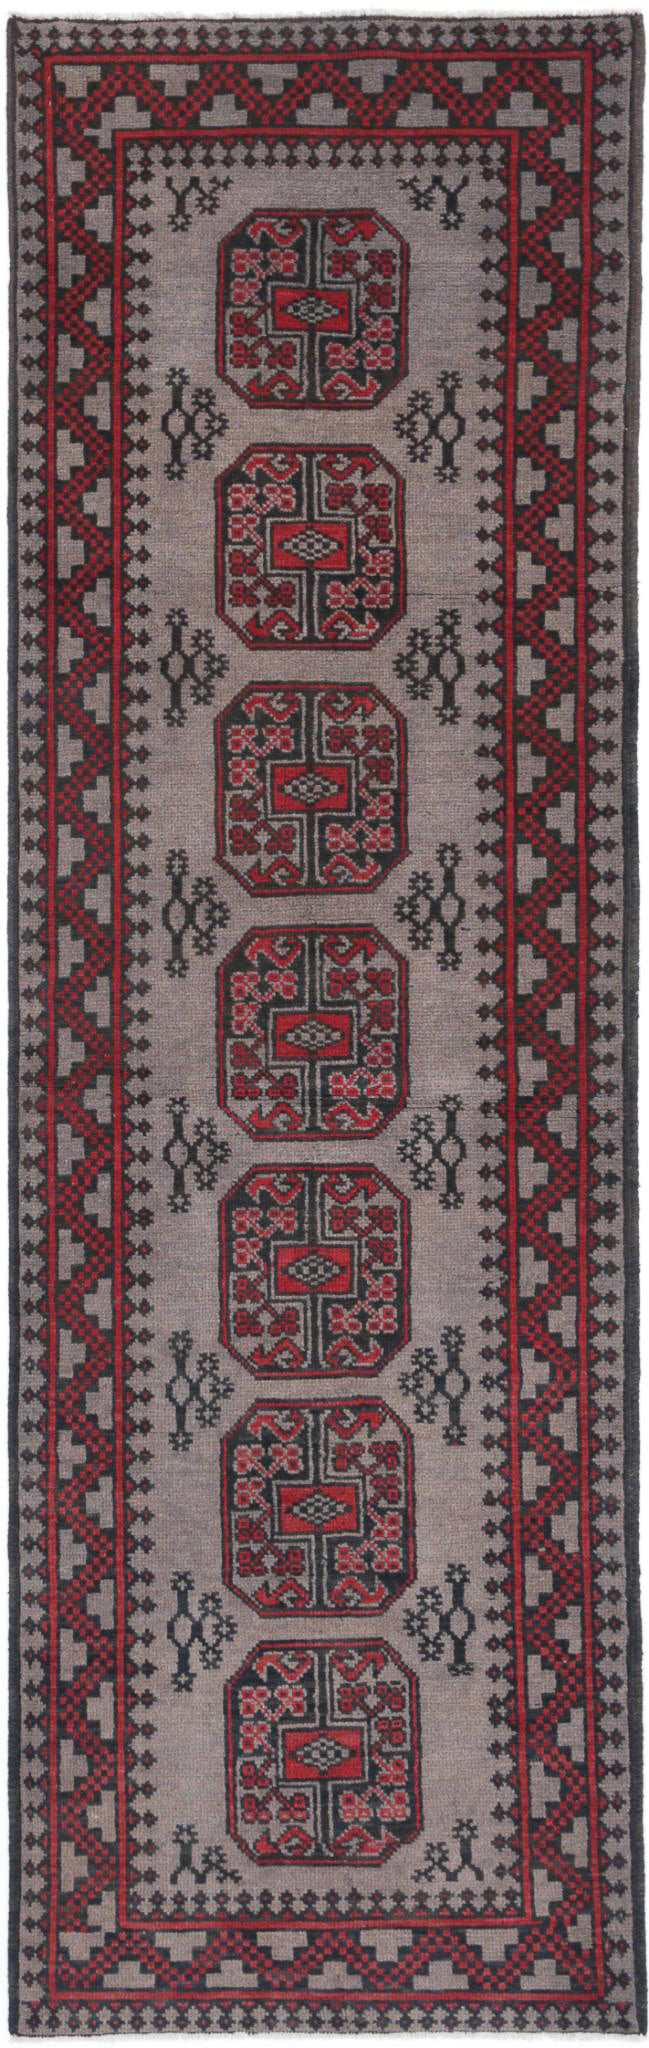 Revival-hand-knotted-gul-collection-wool-rug-5013995.jpg